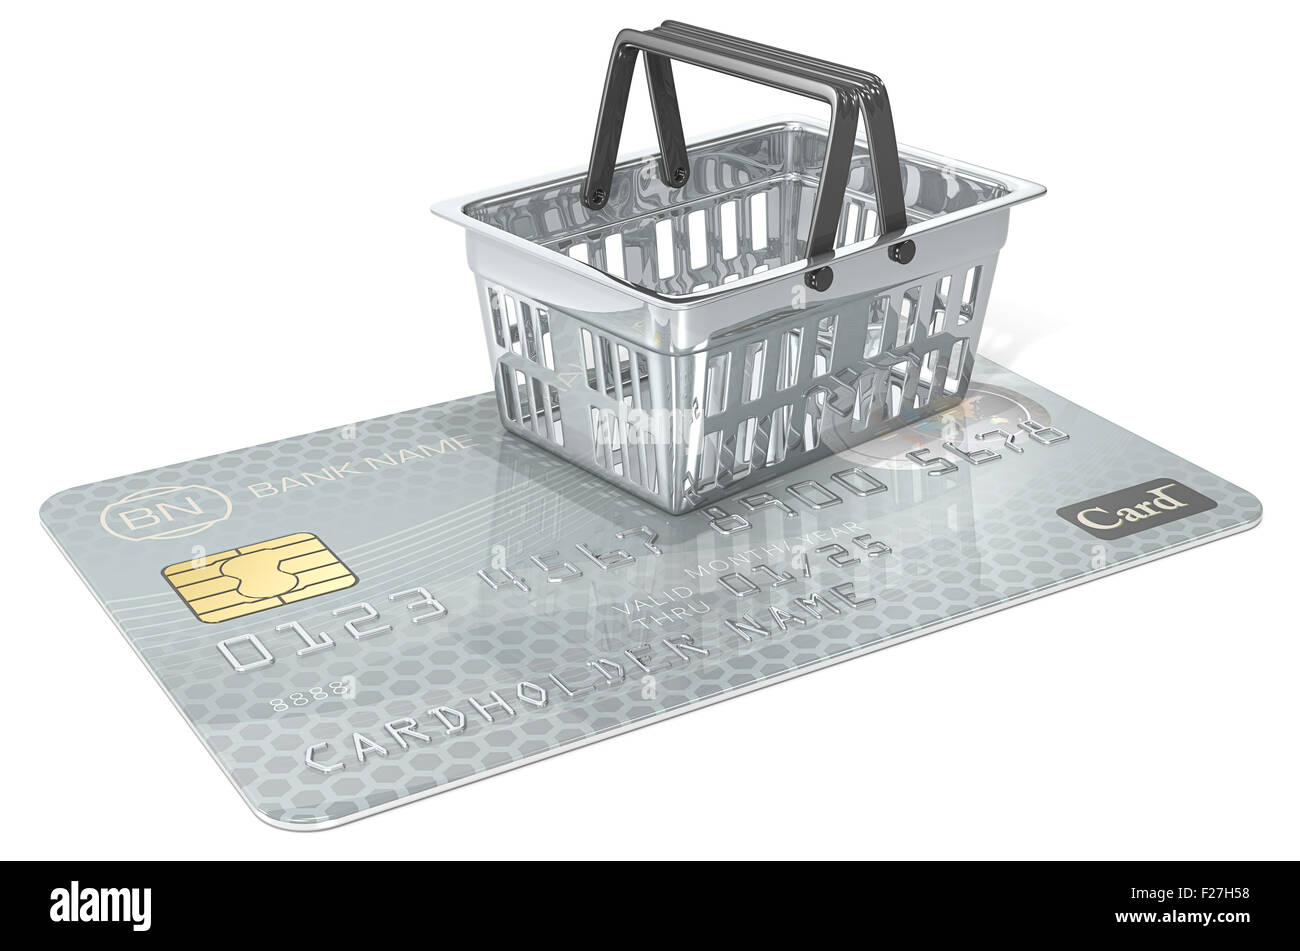 Credit Card with abstract metal Shopping Basket. Generic name,numbers and logo. Stock Photo